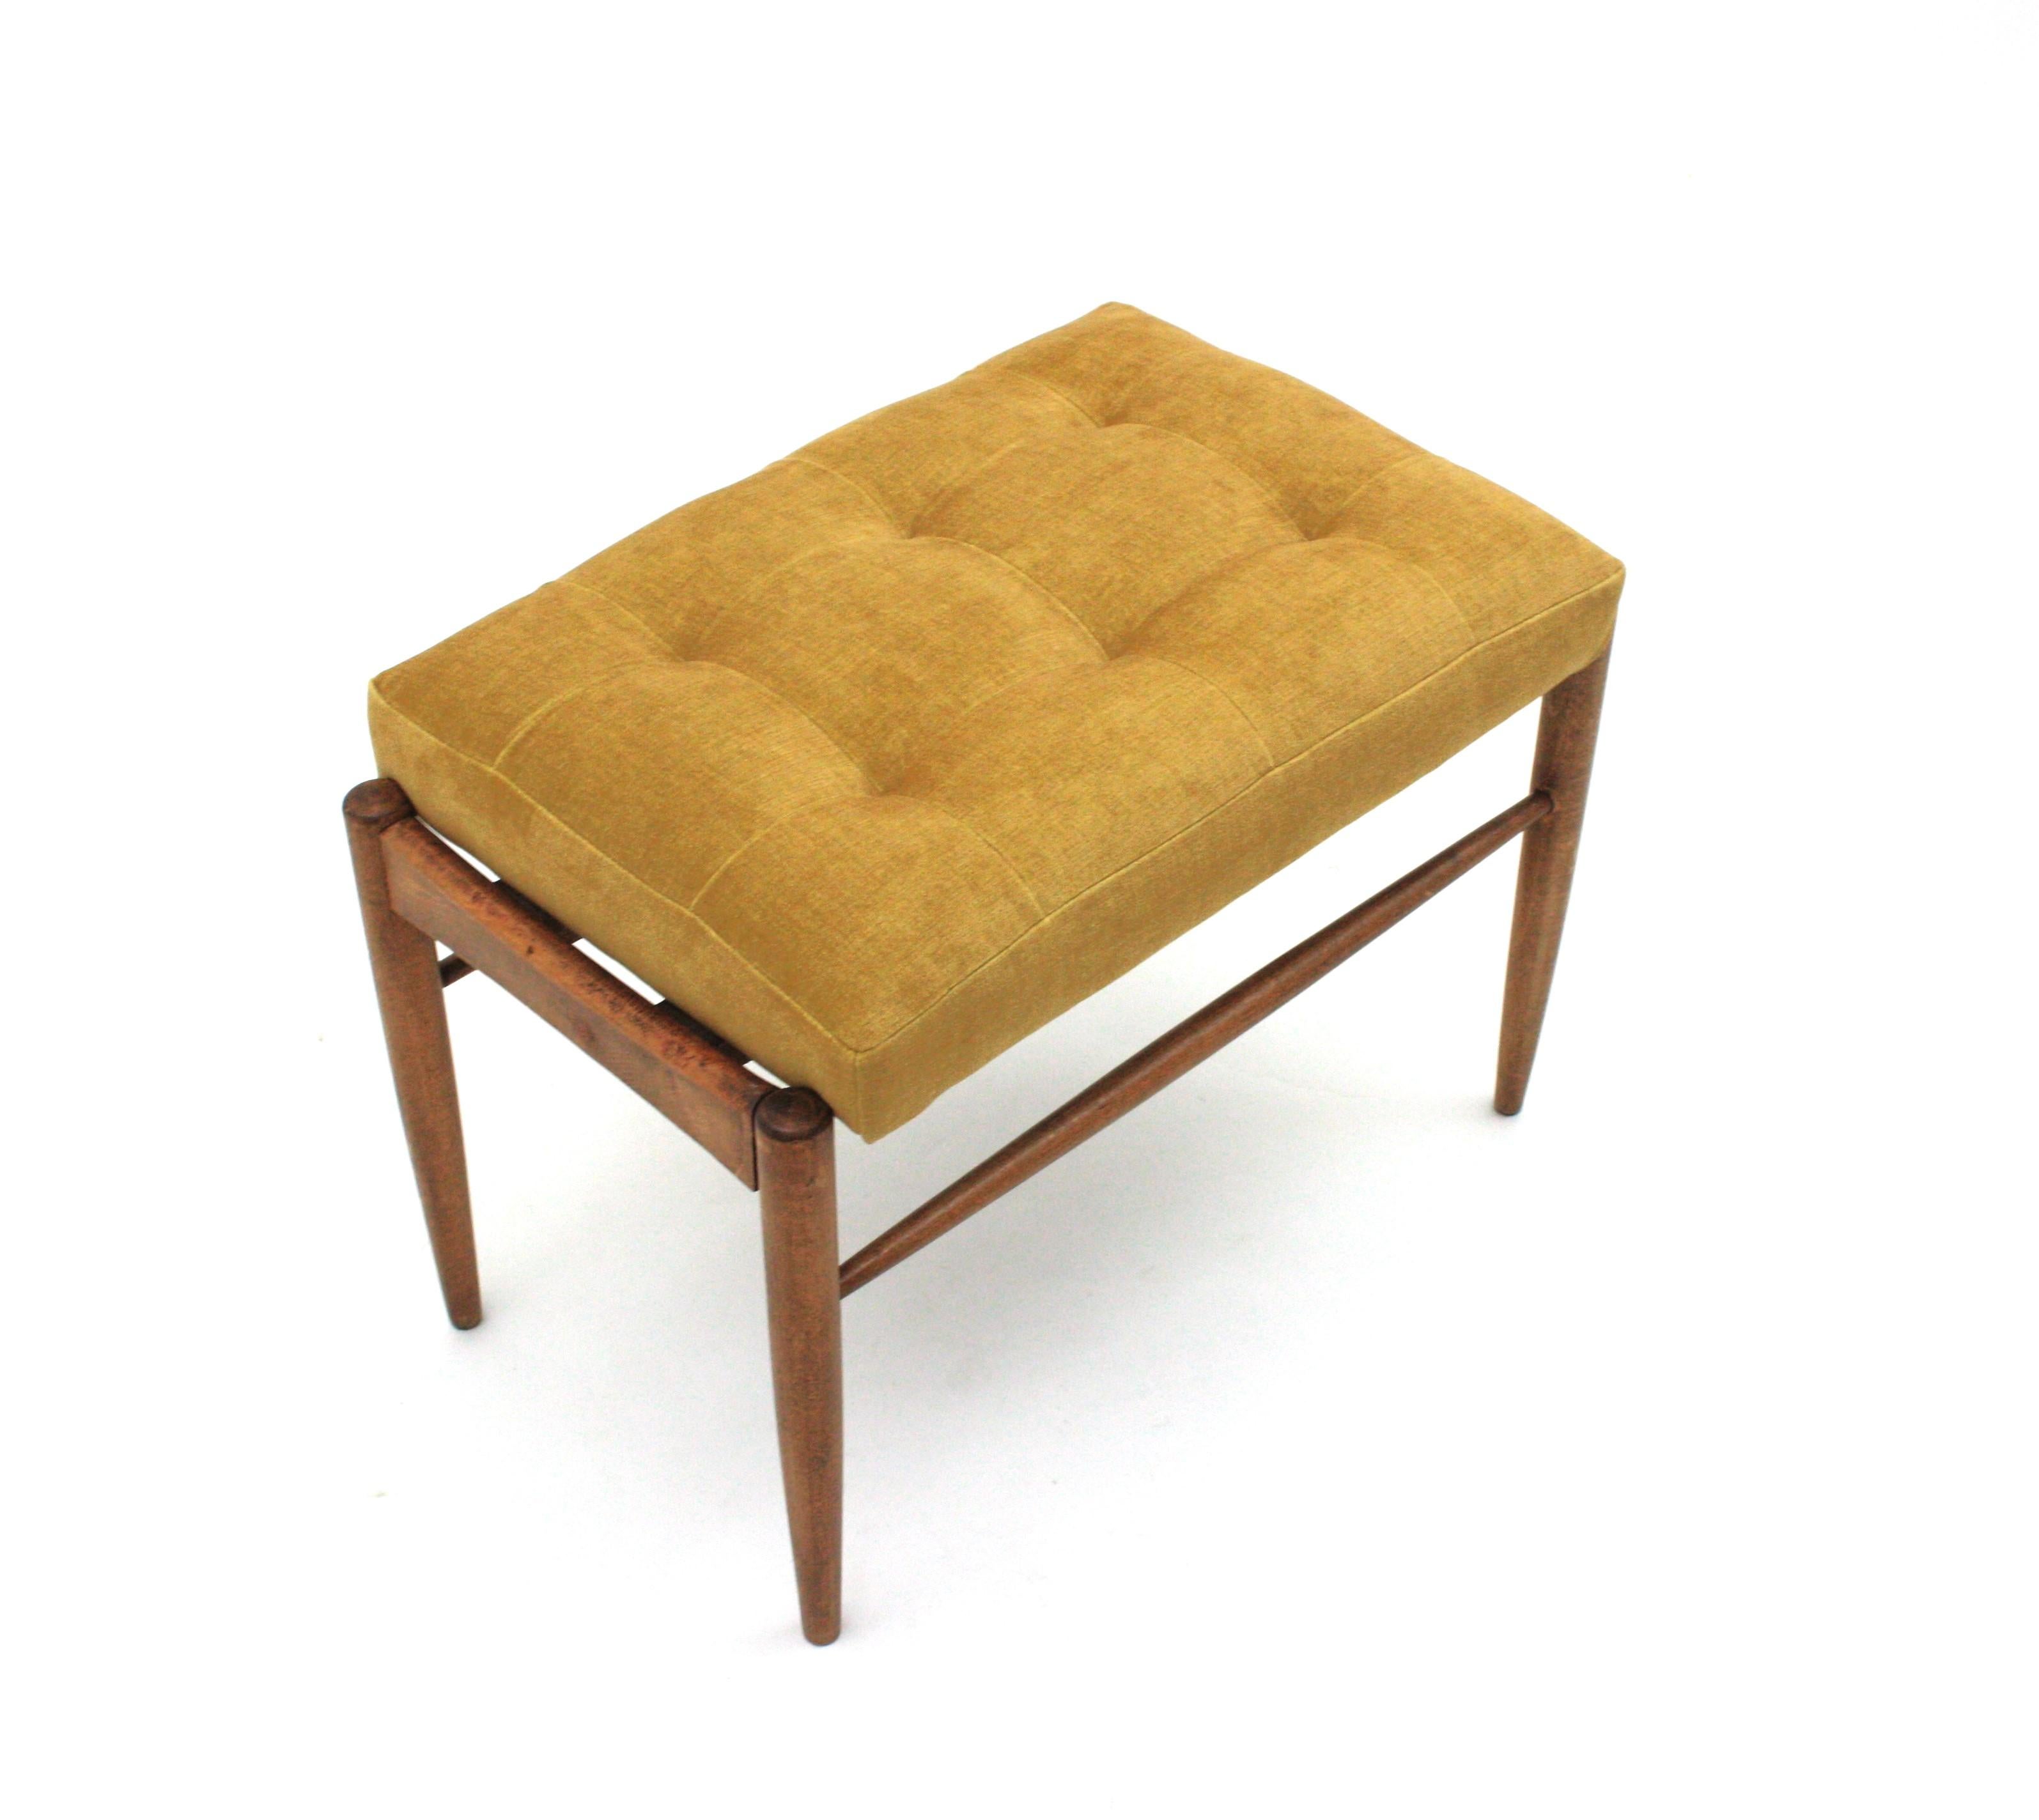 20th Century Scandinavian Modern Stool Ottoman or Bench New Upholstered in Yellow Chenille For Sale